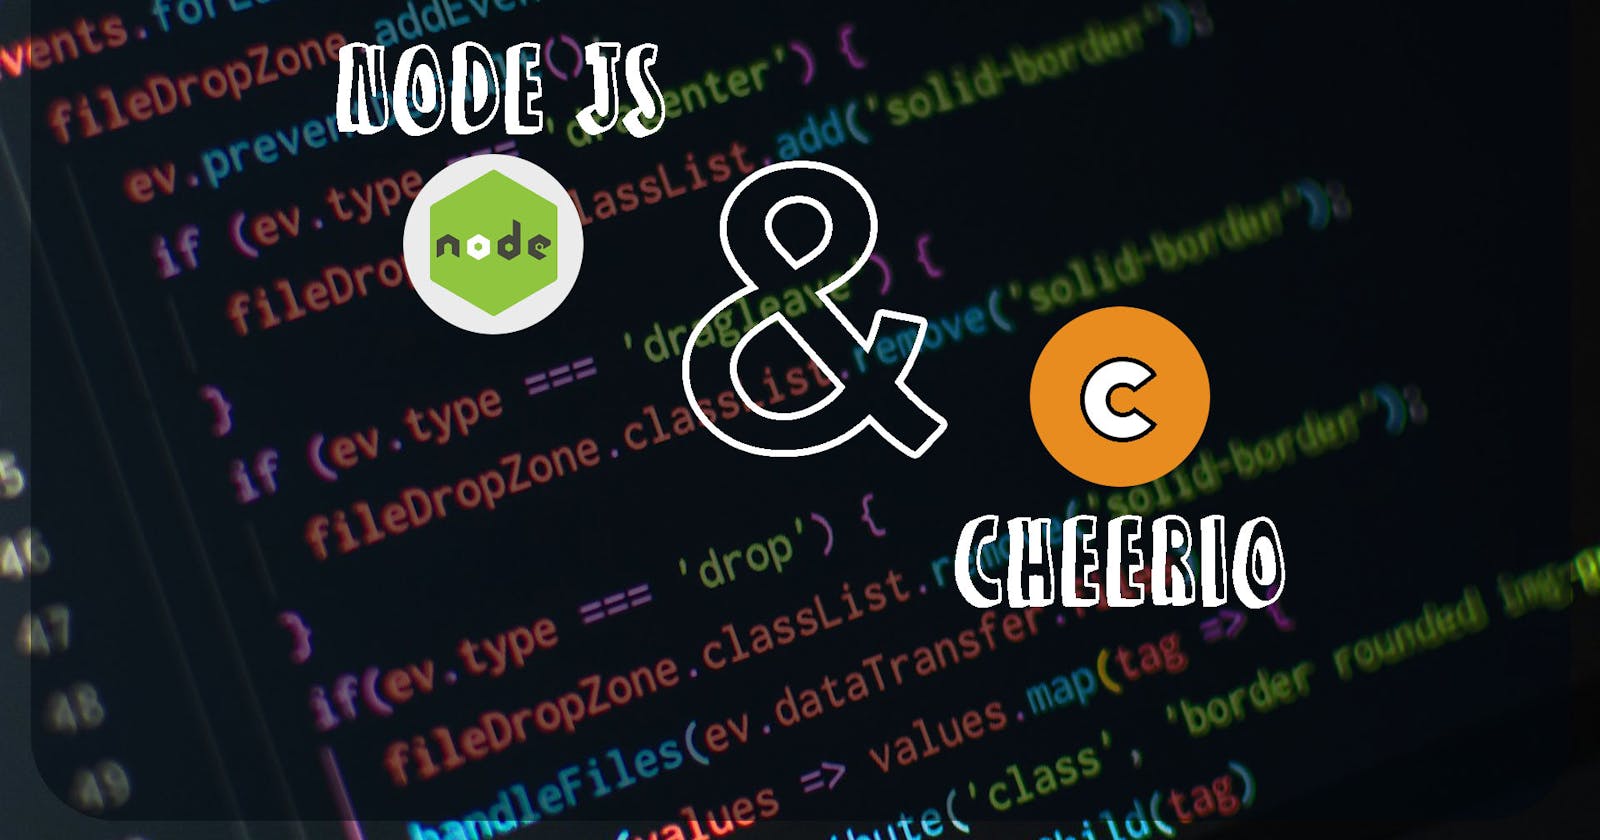 Web Scraping 101 – Introduction to Data Scraping using Cheerio with Node JS